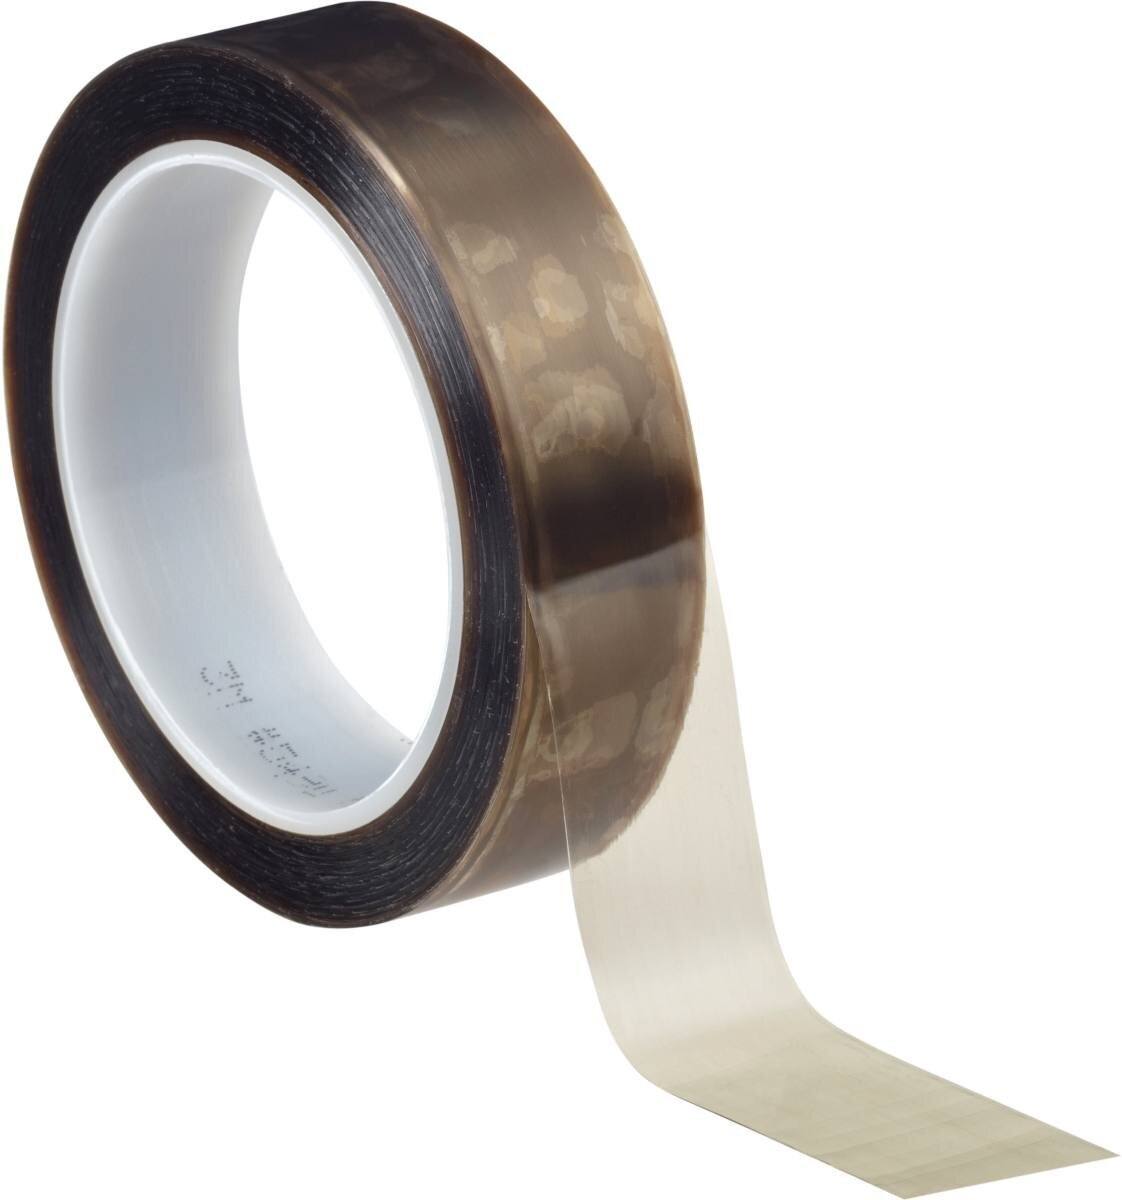 3M 5490 PTFE extruded film adhesive tape 75mmx33m, 0.09mm, silicone